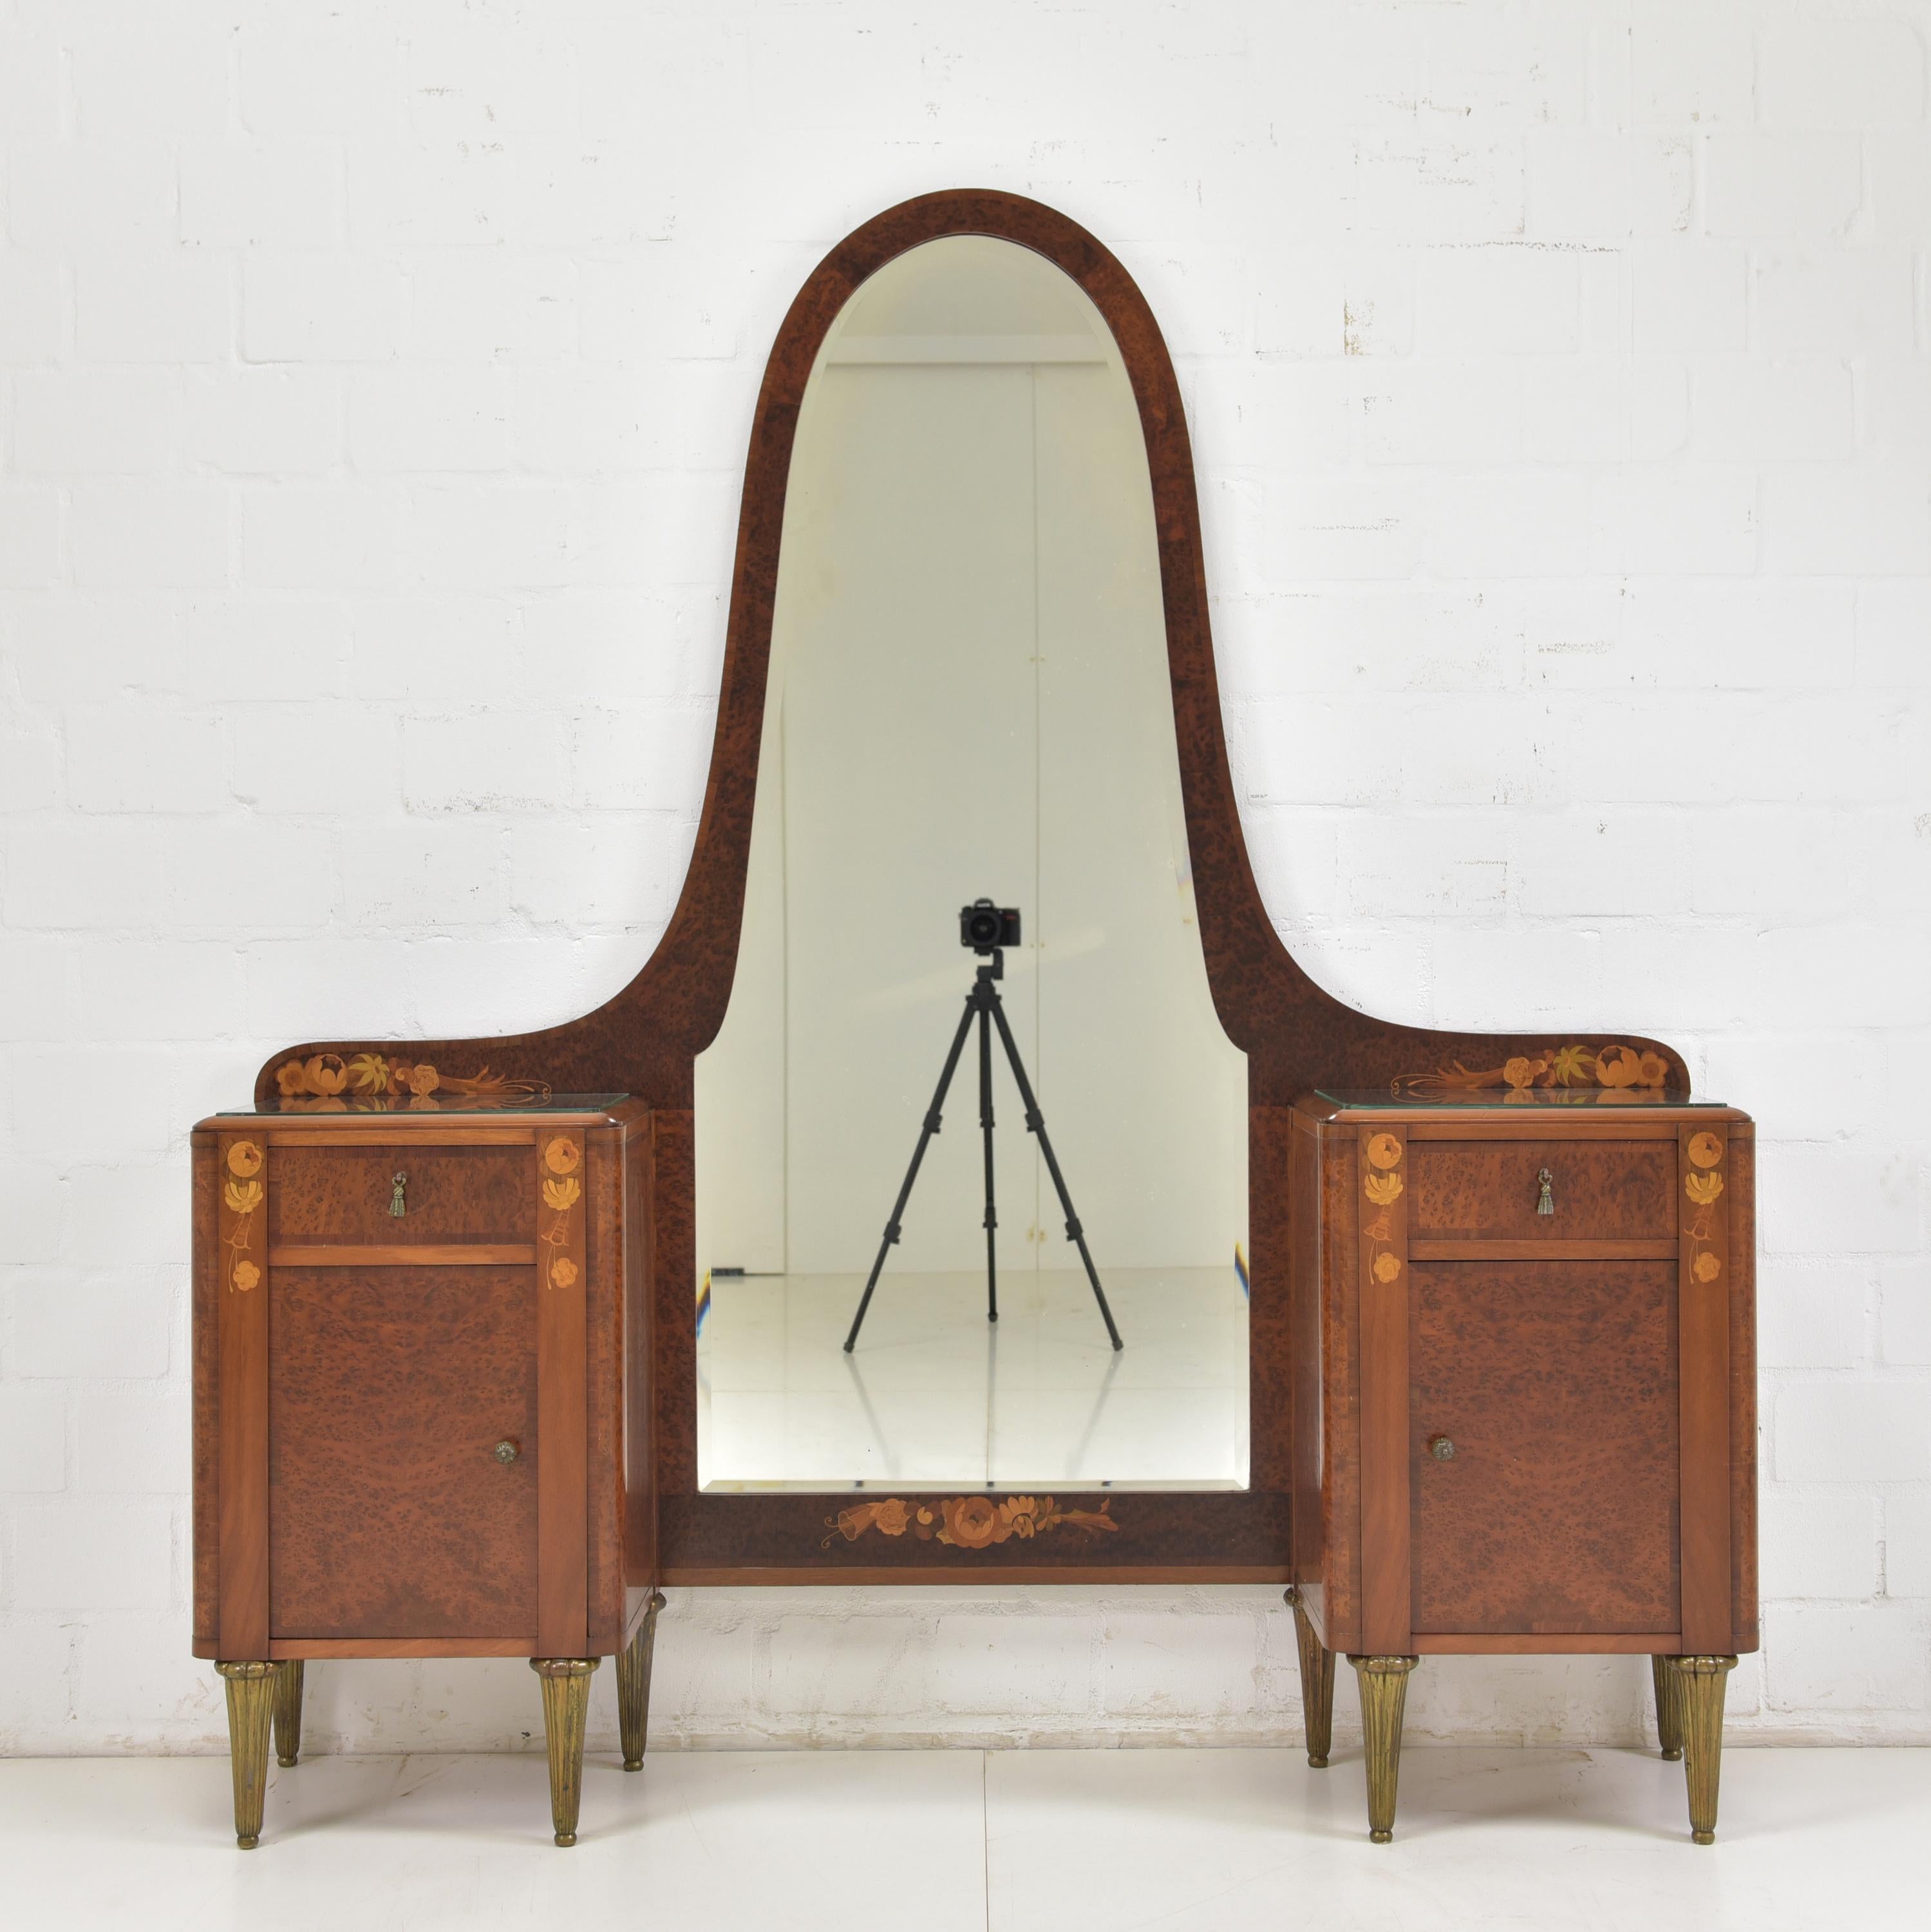 Dresser restored Art Deco around 1925 Dressing table mirror dresser

Features:
Two-door model with drawers and large mirror
Very high quality processing
Drawers pronged
Faceted mirror
Original fittings
High quality metal legs
Abstract